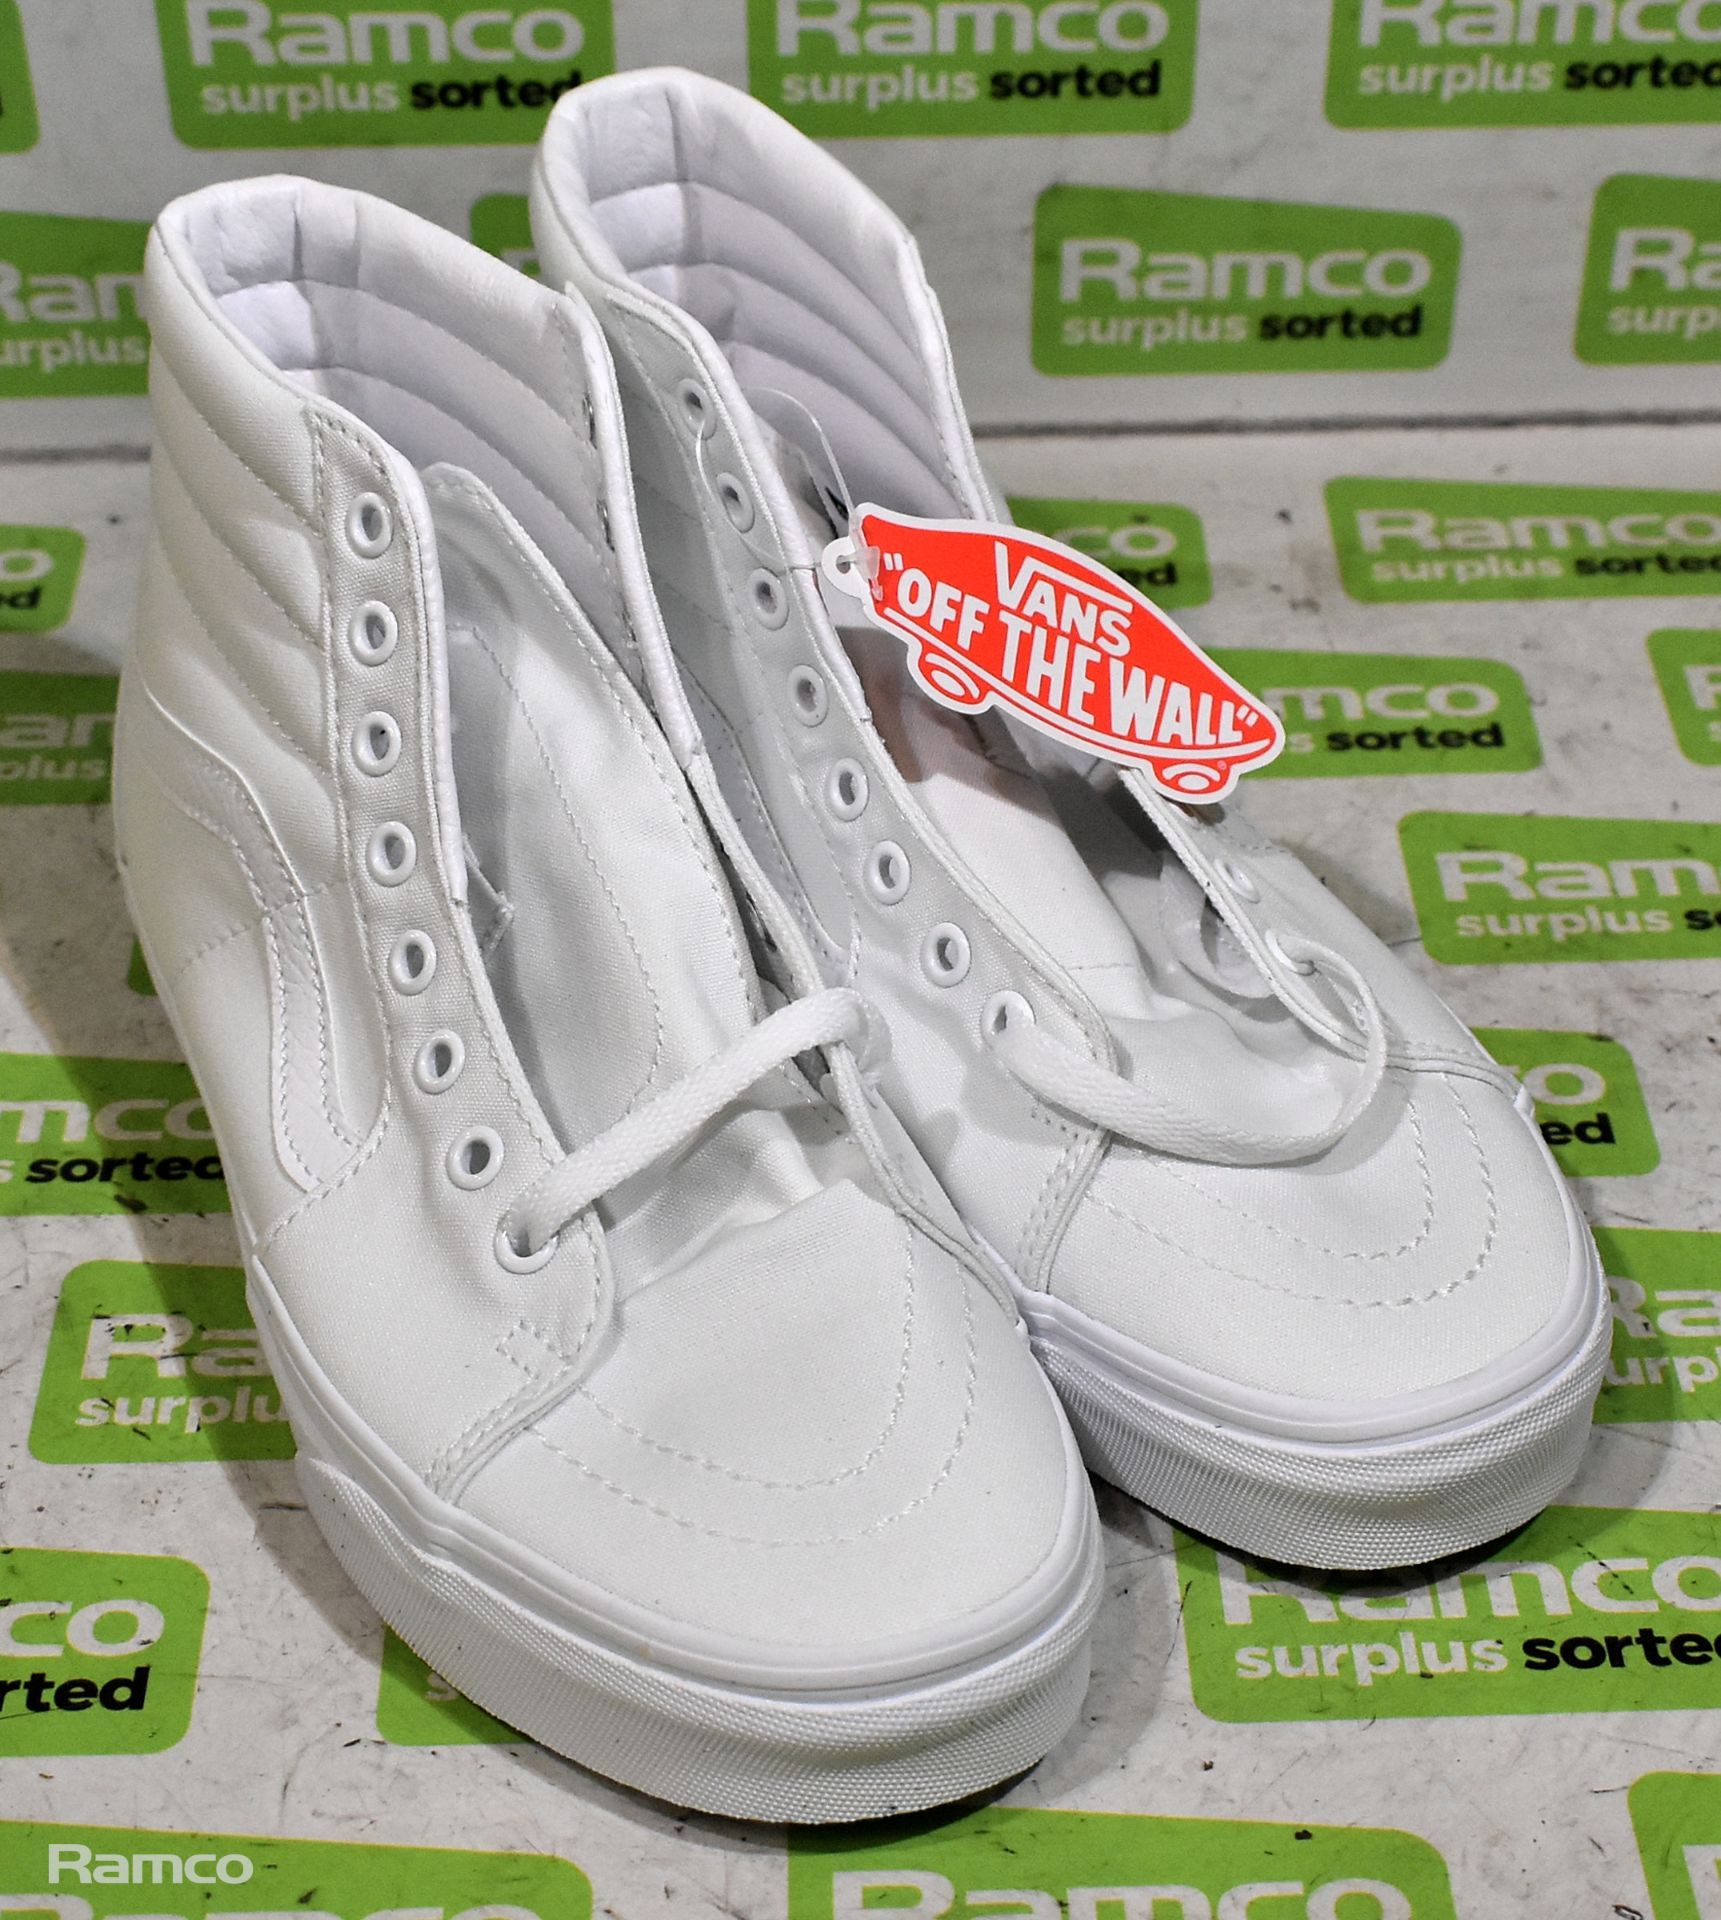 VANS Sk8-Hi white high top trainers - UK size 7 - not worn, still in box